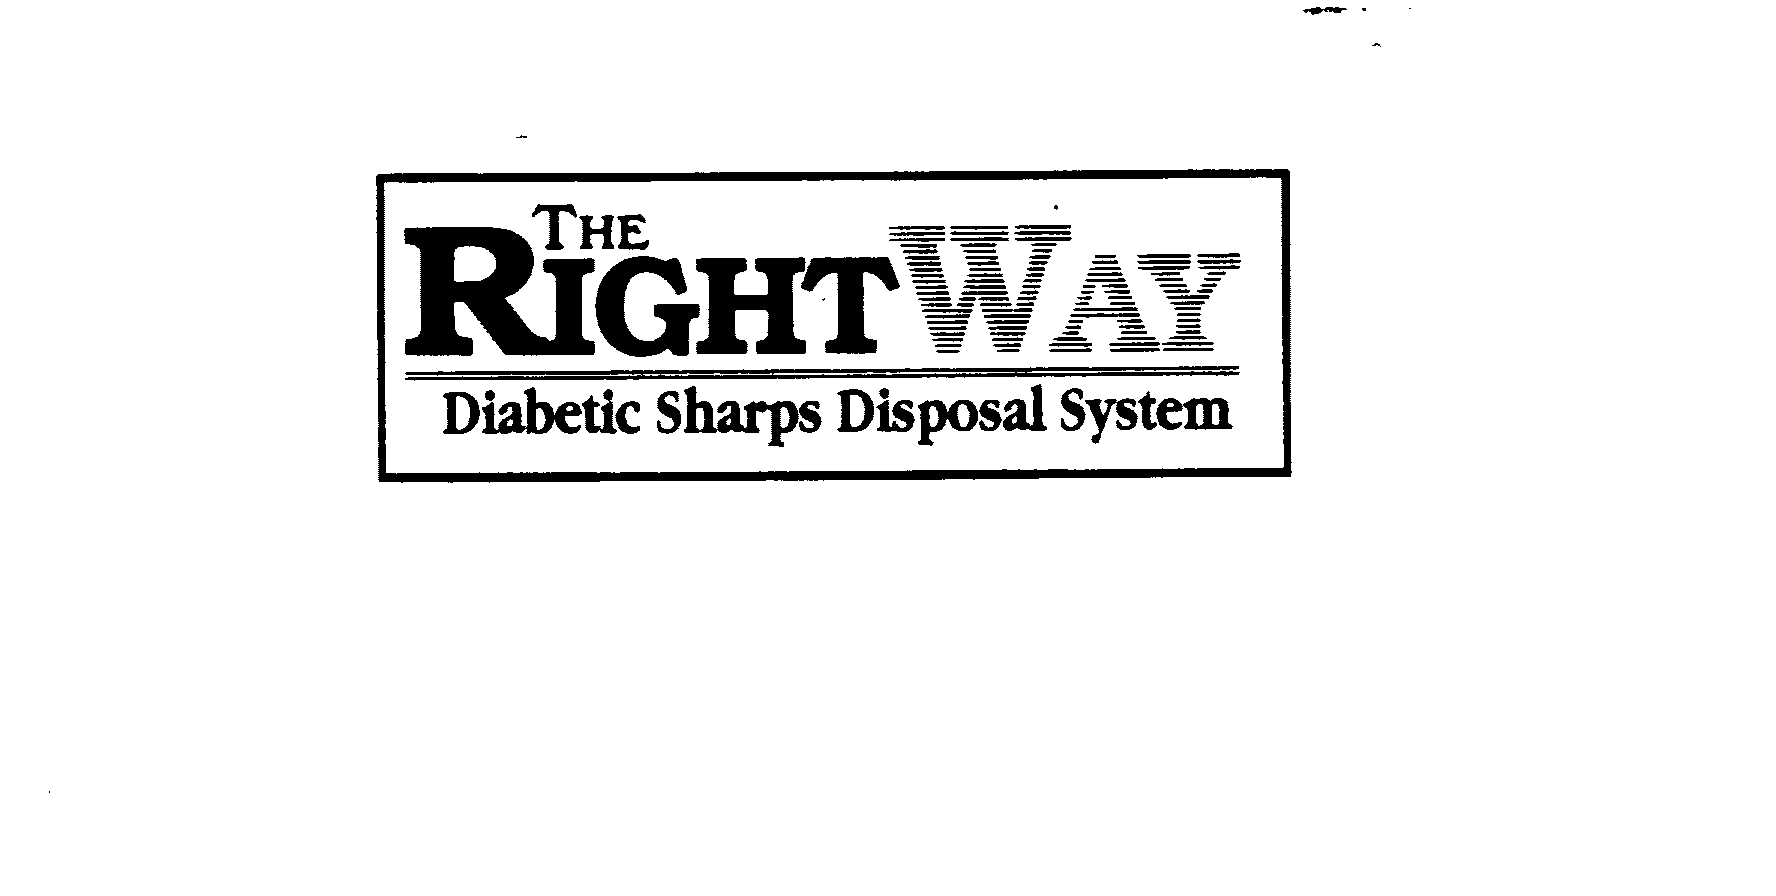  THE RIGHT WAY DIABETIC SHARPS DISPOSAL SYSTEM